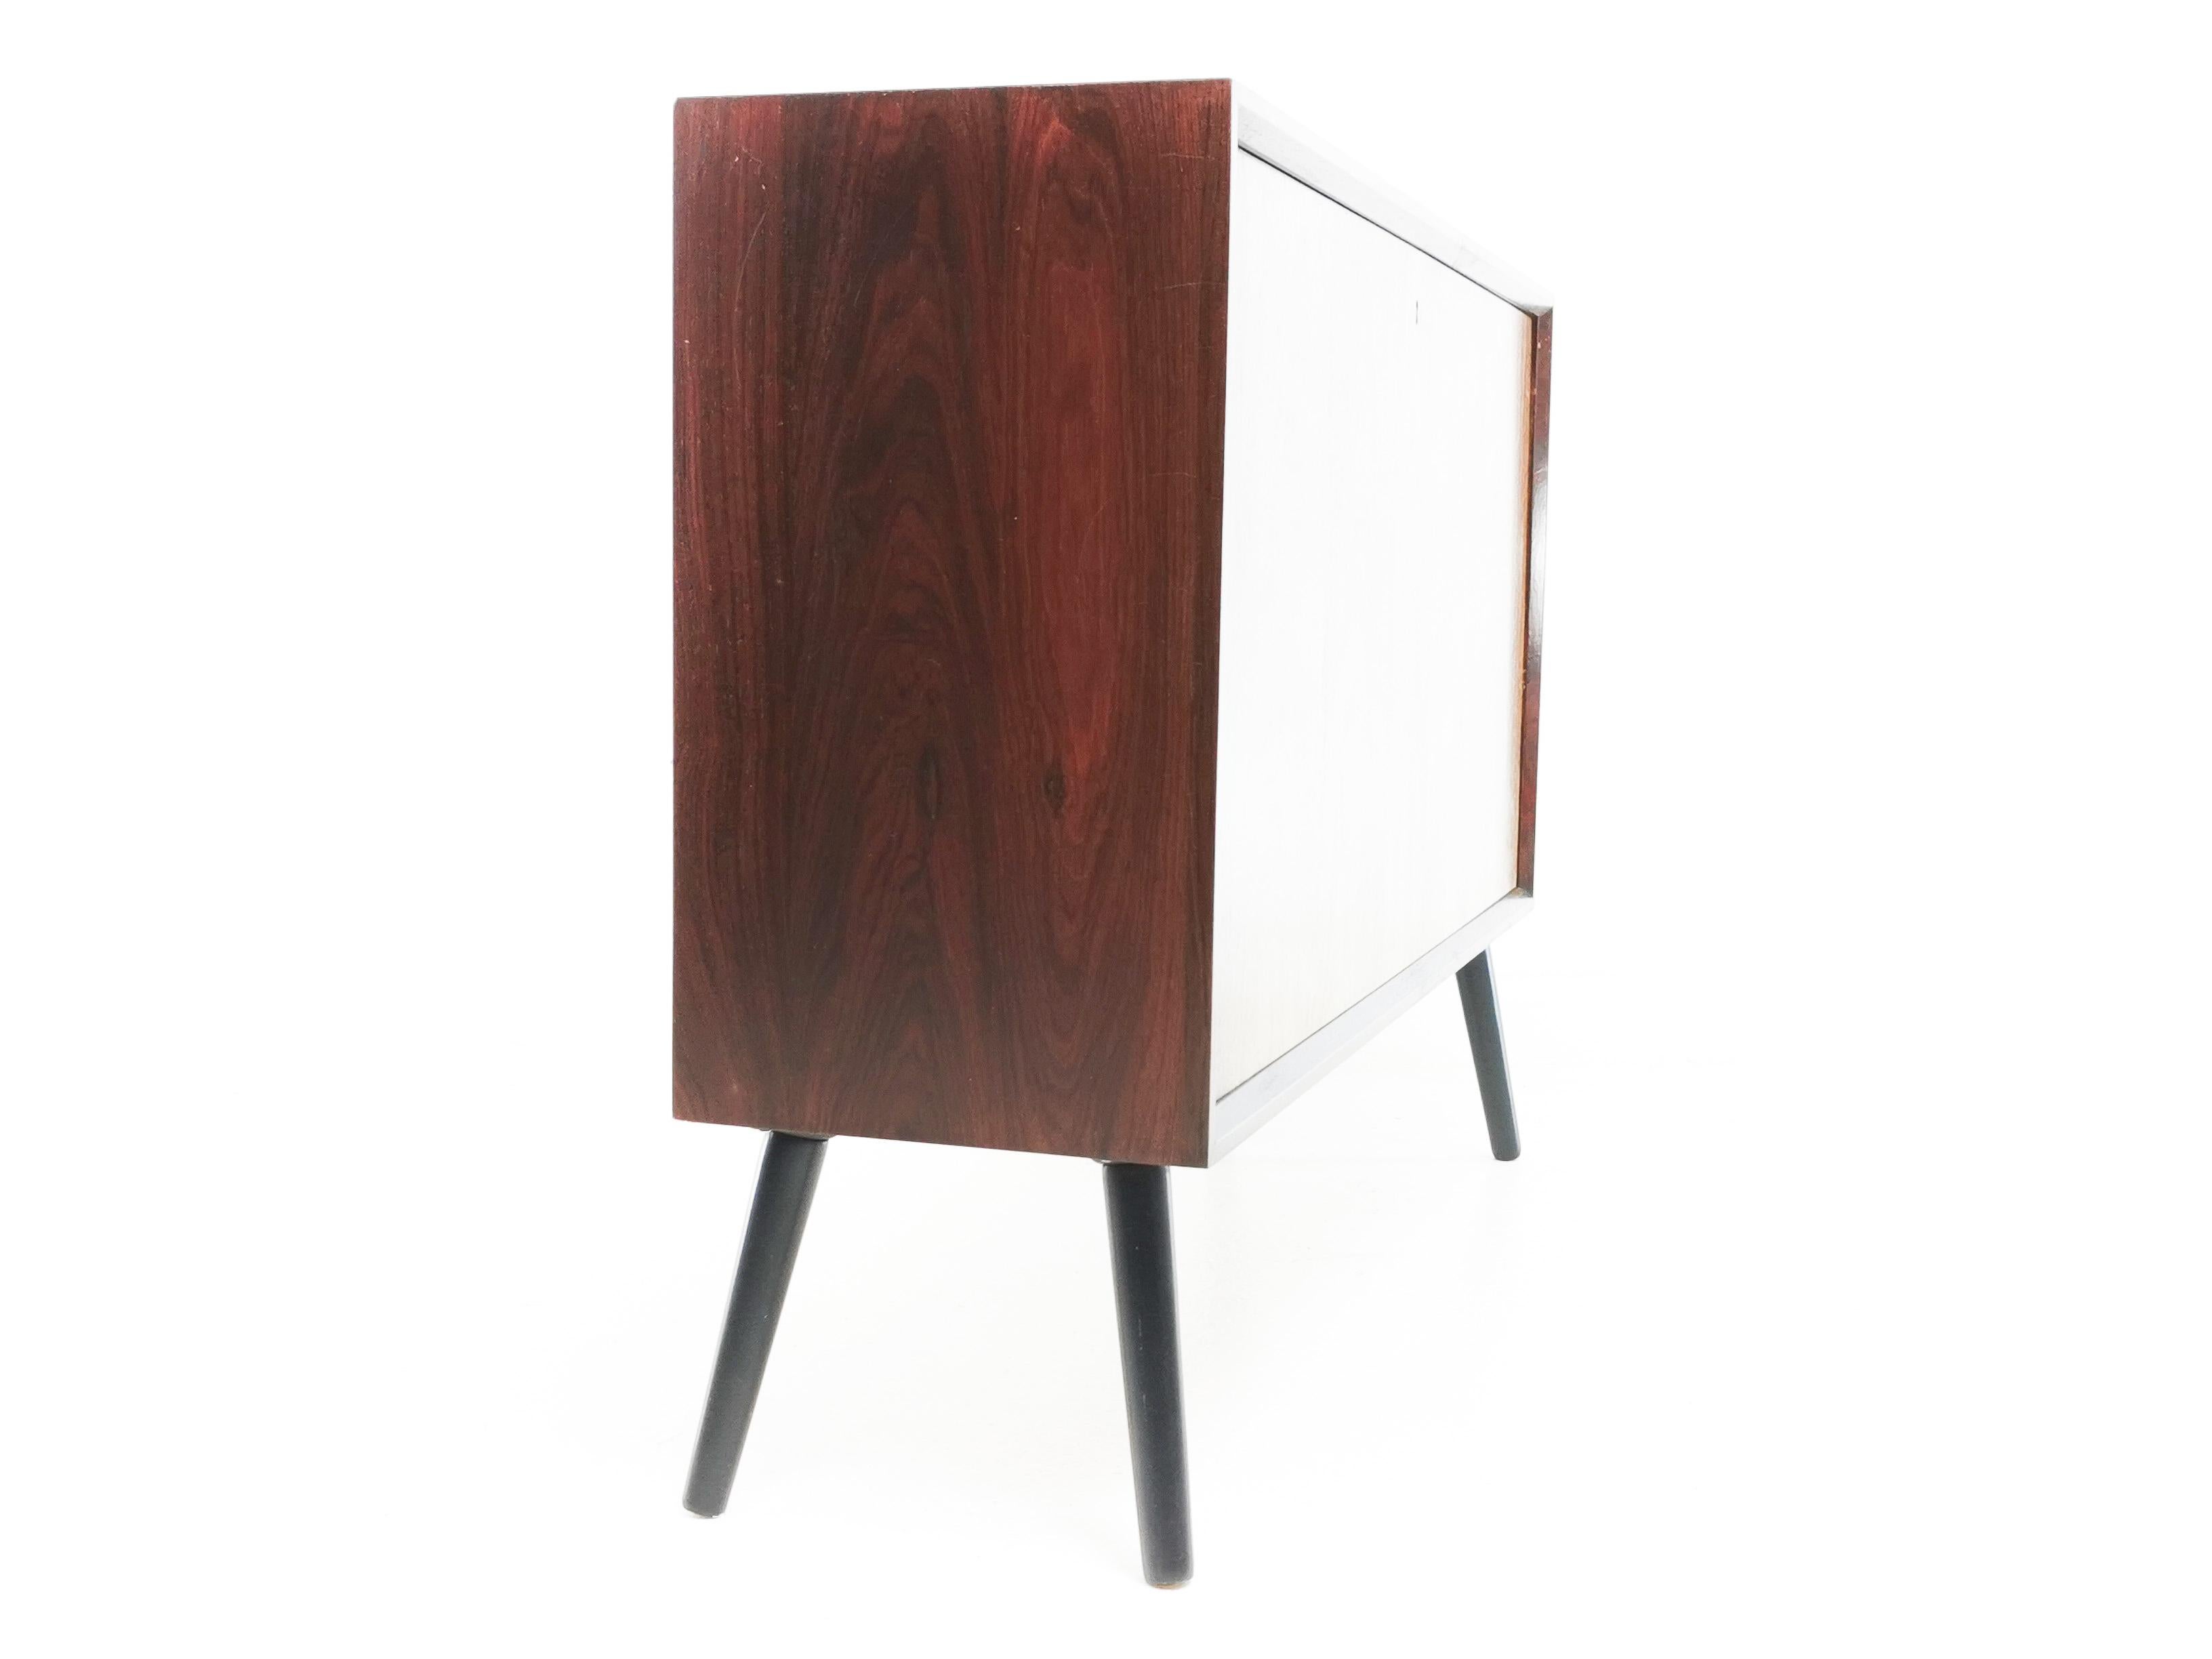 Danish rosewood cabinet

A beautifully designed and crafted cabinet by Johannes Sorth for Bornholm Møbelfabrik. 

The unit has minimal clean lines, it is raised on splayed ebonised legs and features a single fall front cupboard door with key.